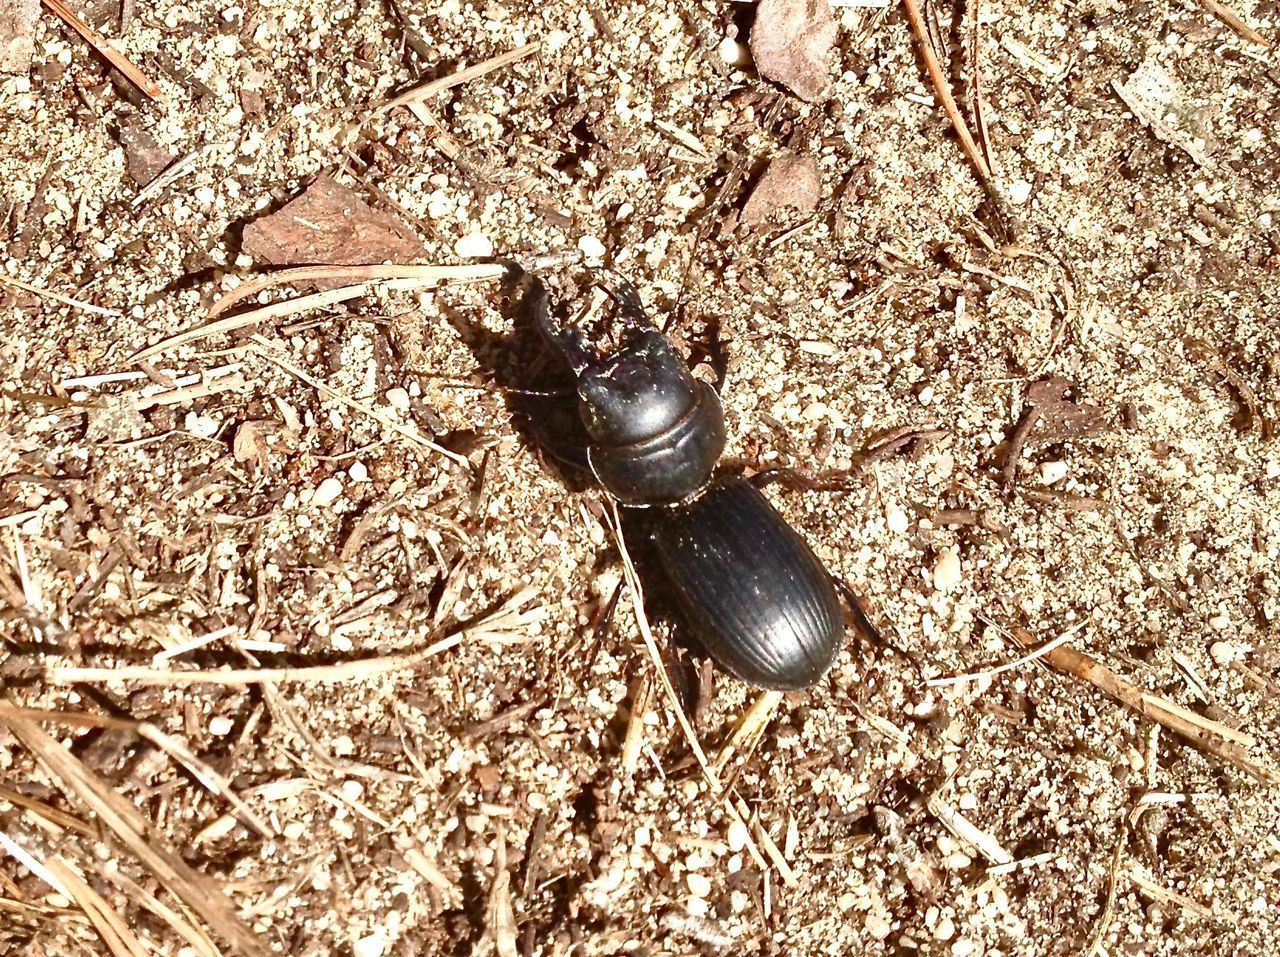 CLOSE-UP OF INSECT ON THE GROUND